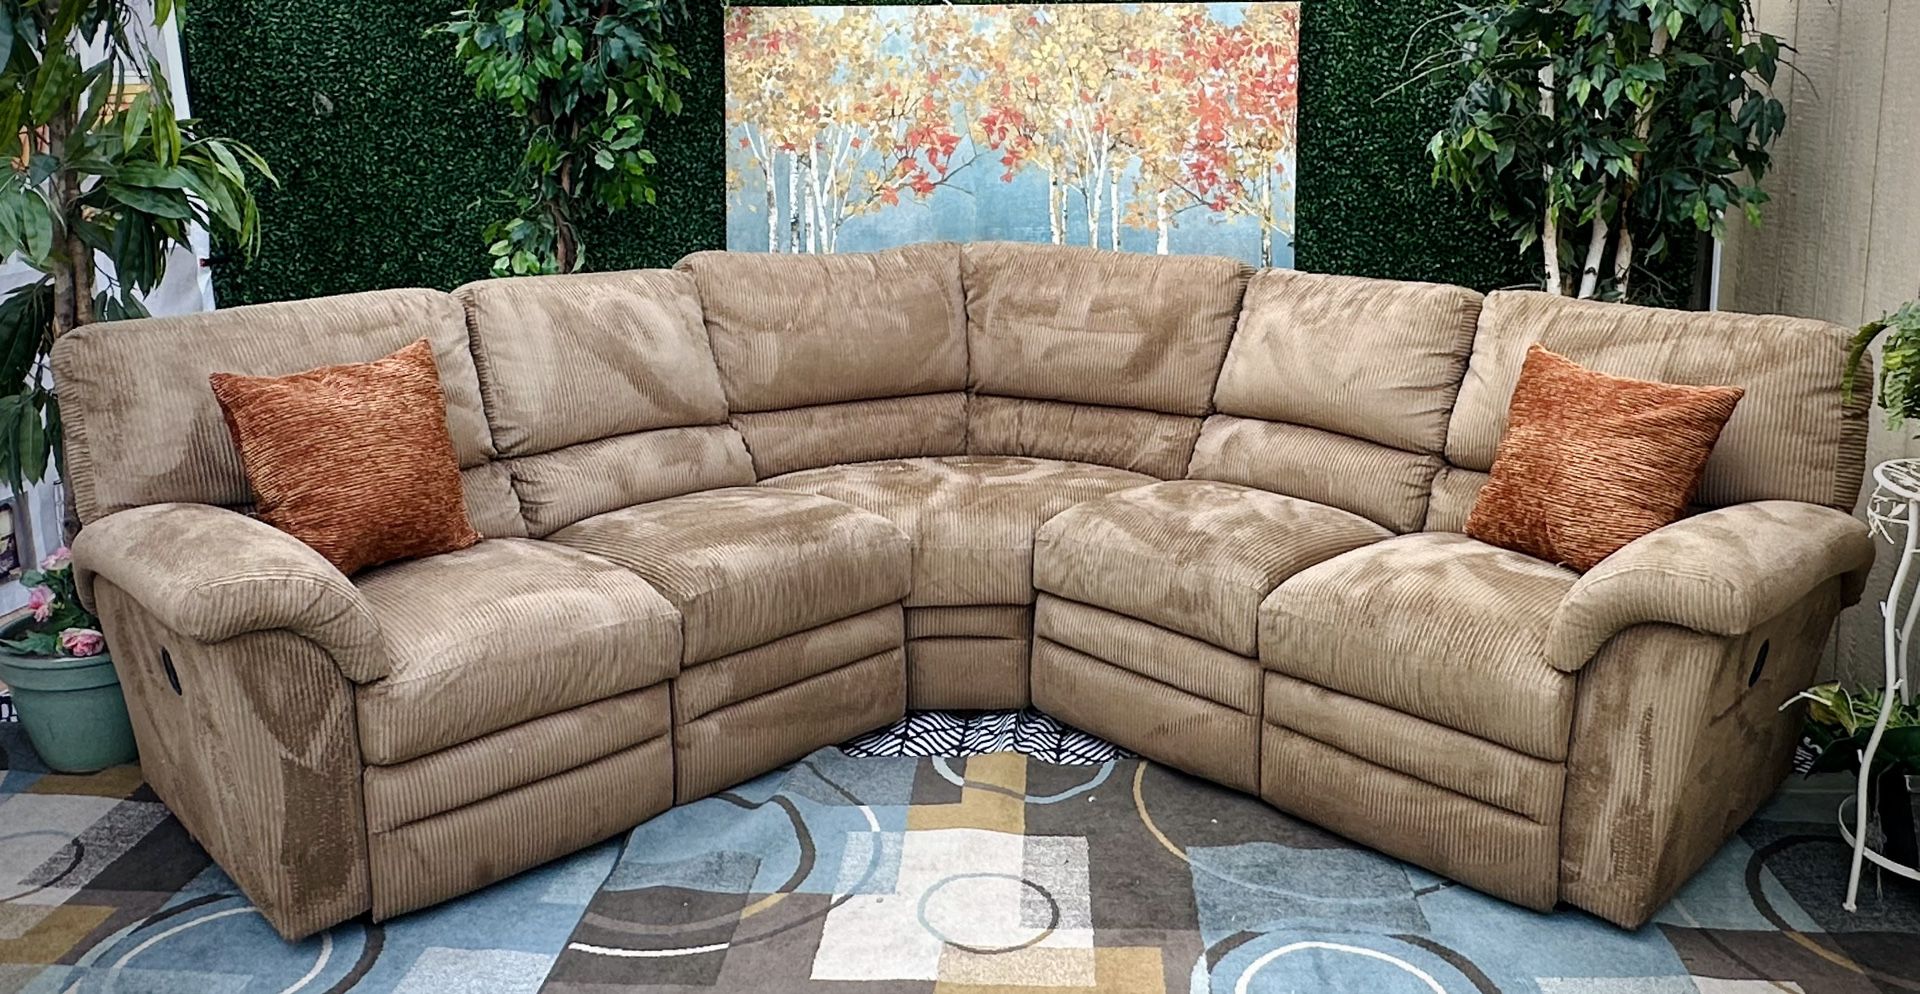 (Free Delivery 🚚🚛) Large La-Z-Boy Corduroy Suede 3-Piece Sectional with End Recliners